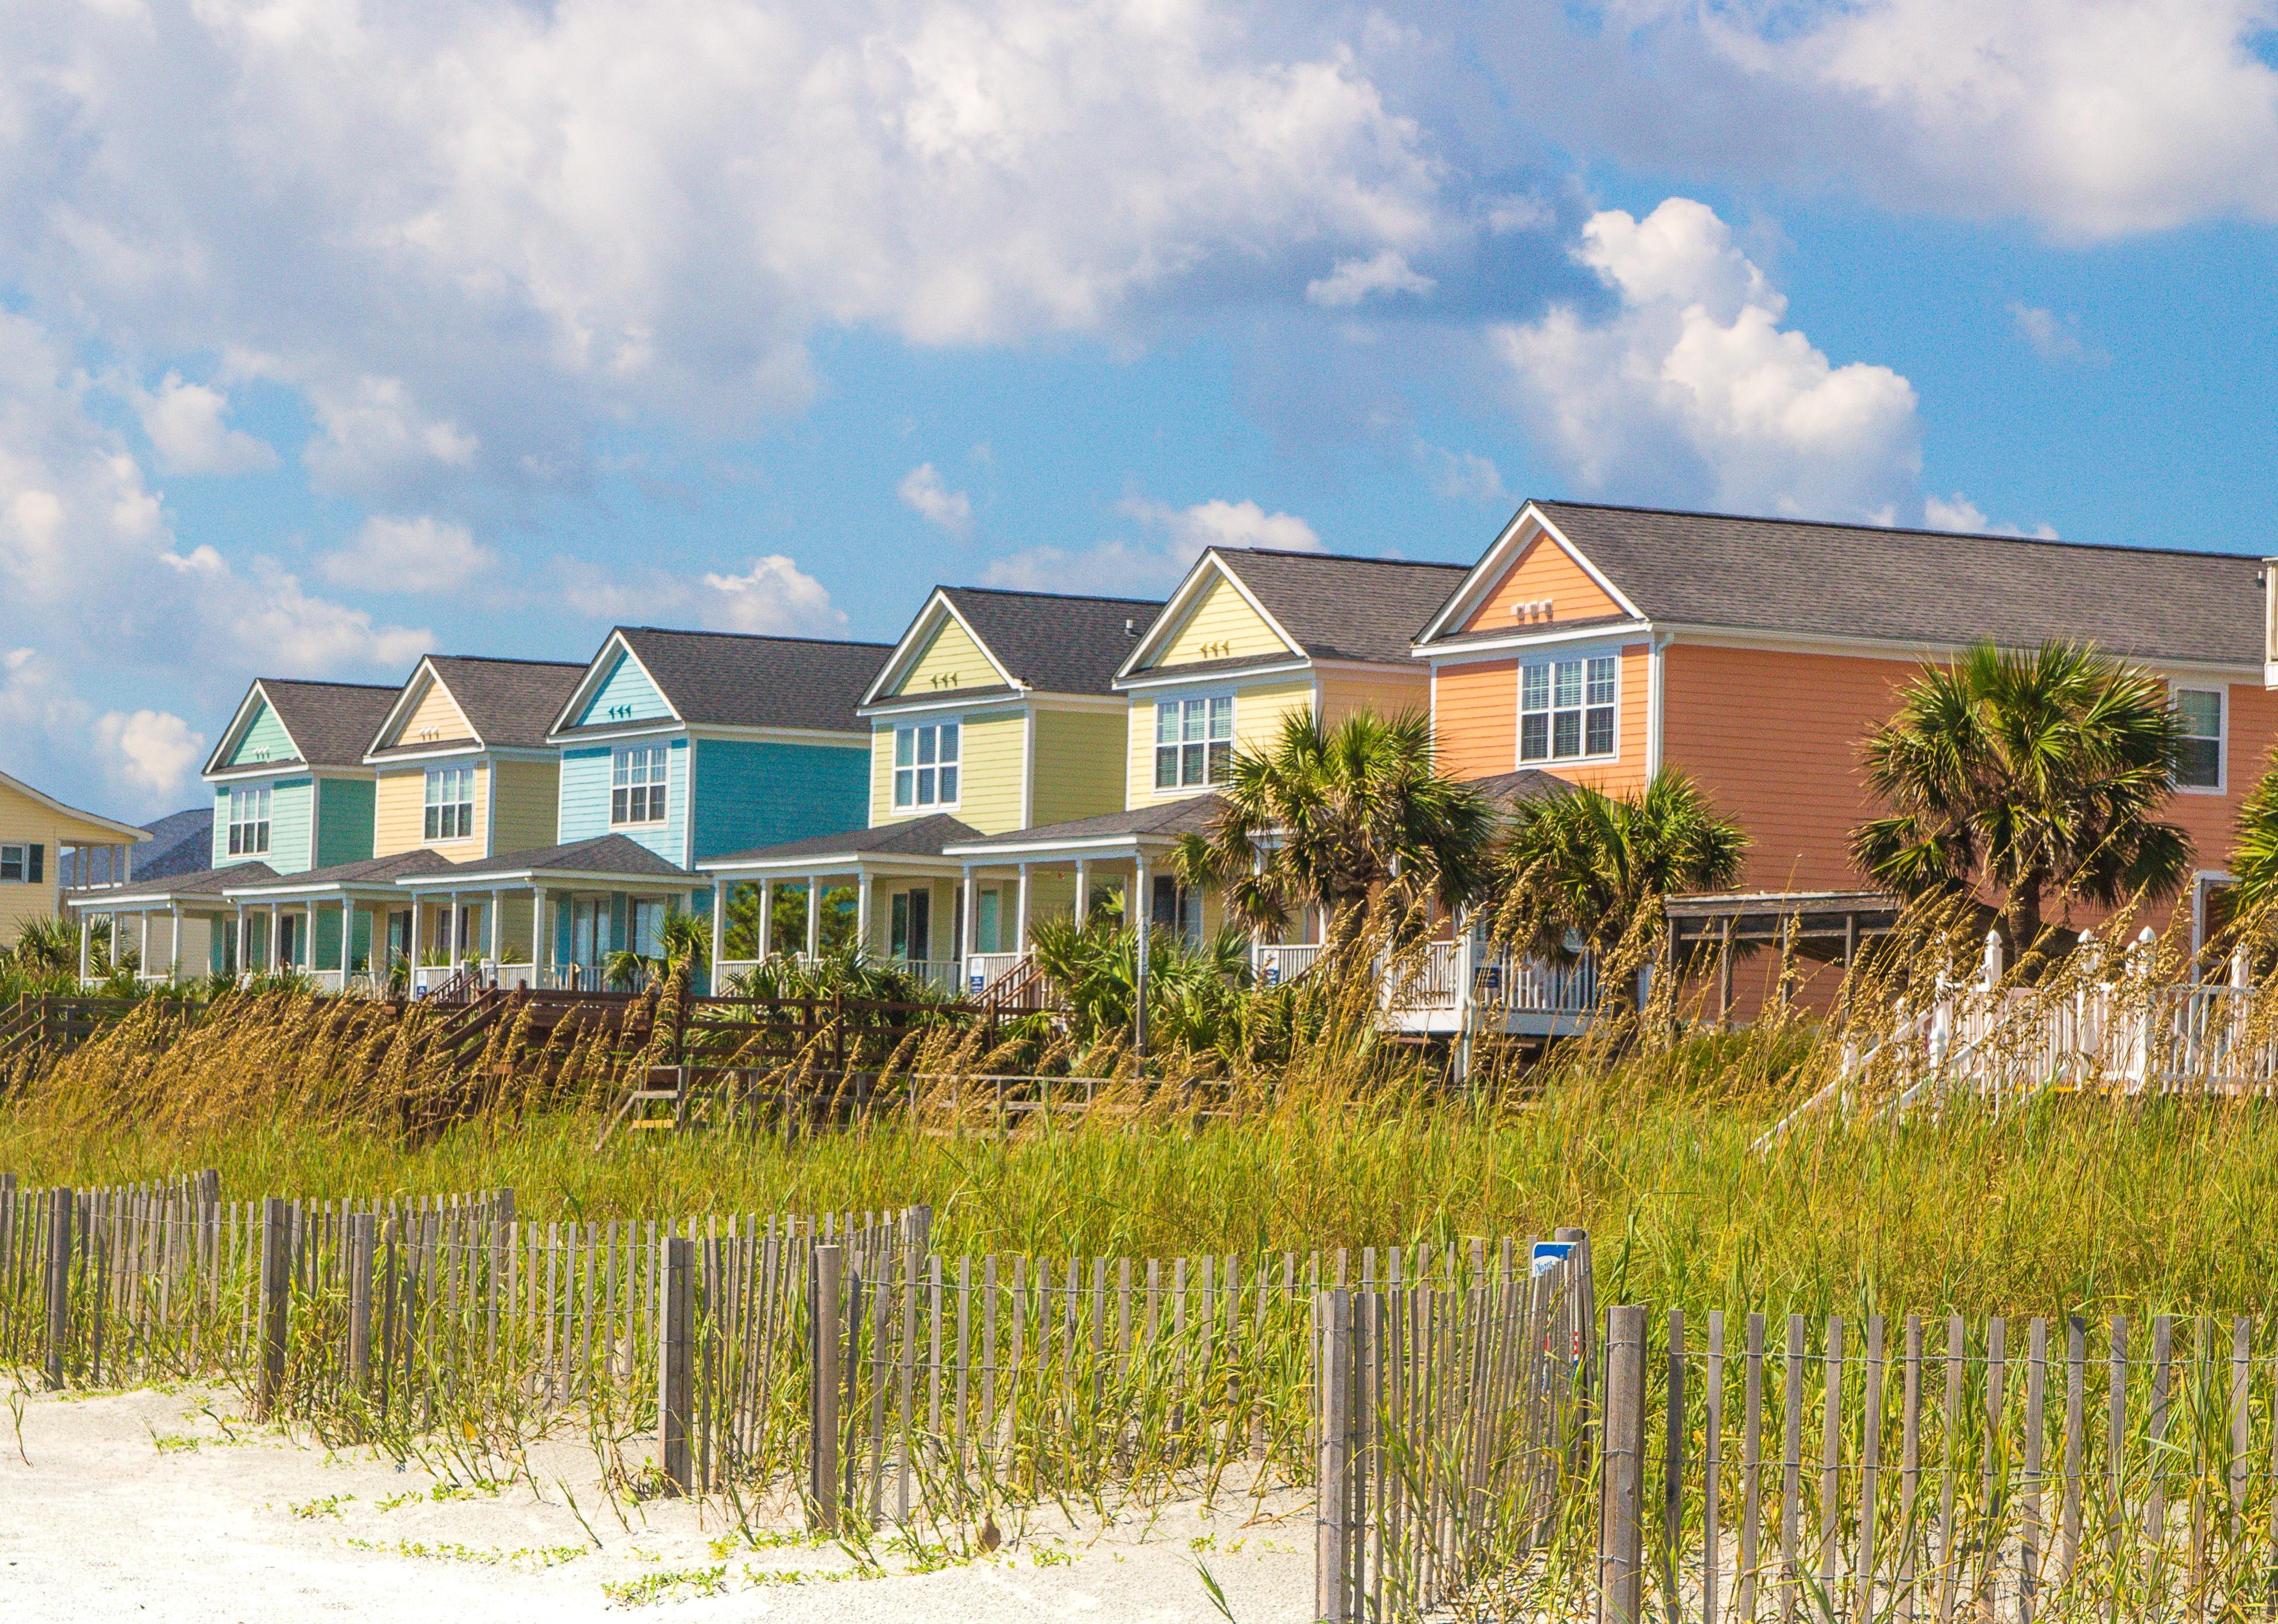 Sand dunes and colorful beach front homes.